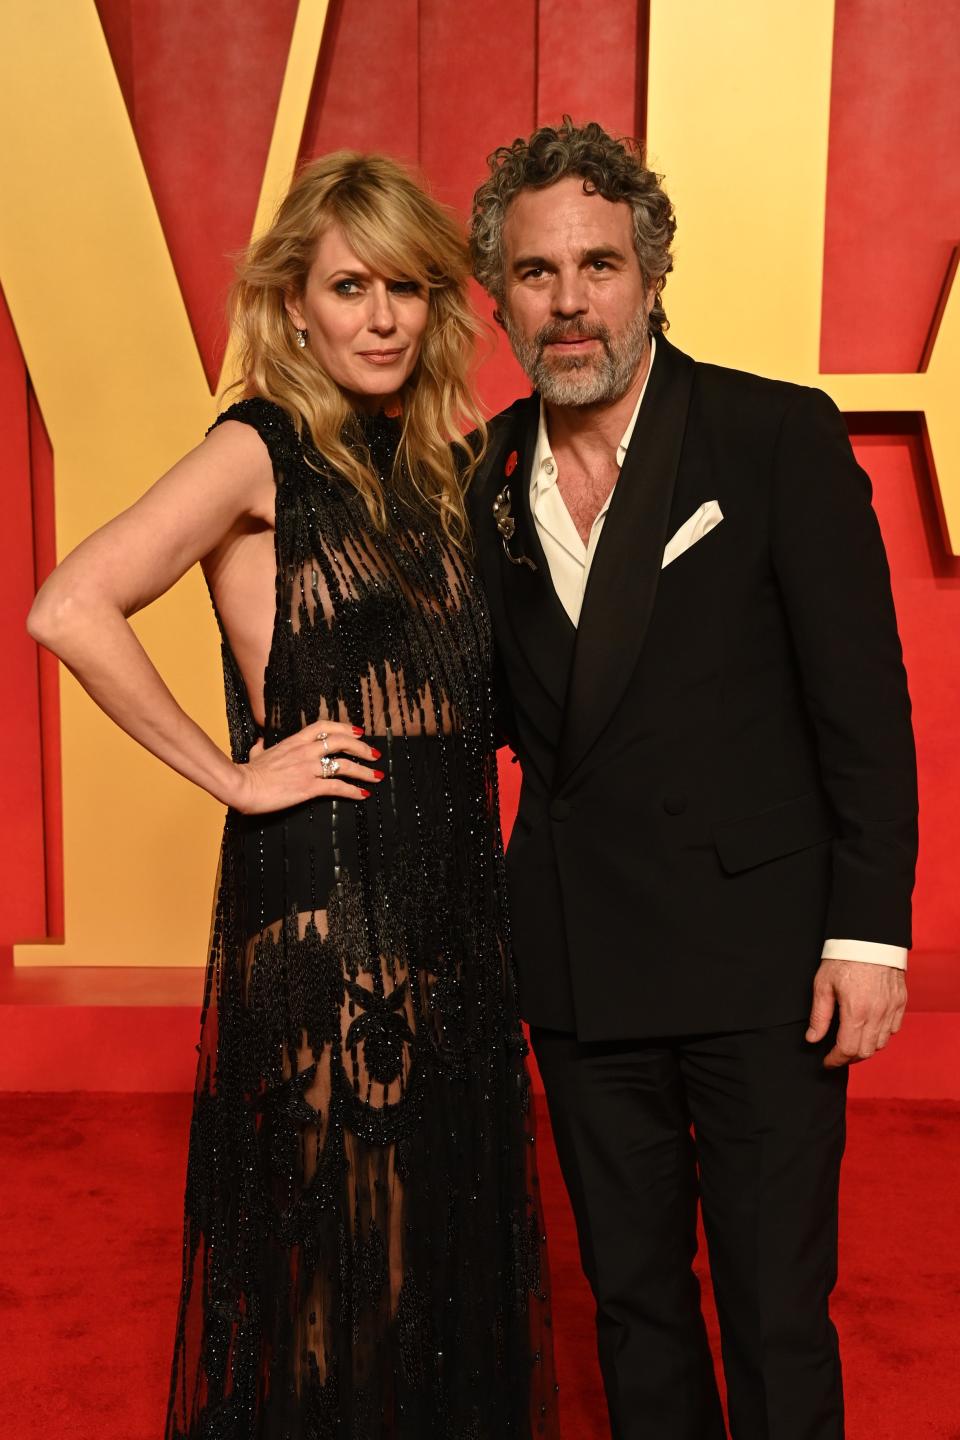 Sunrise Coigney and Mark Ruffalo (Getty Images for Vanity Fair)